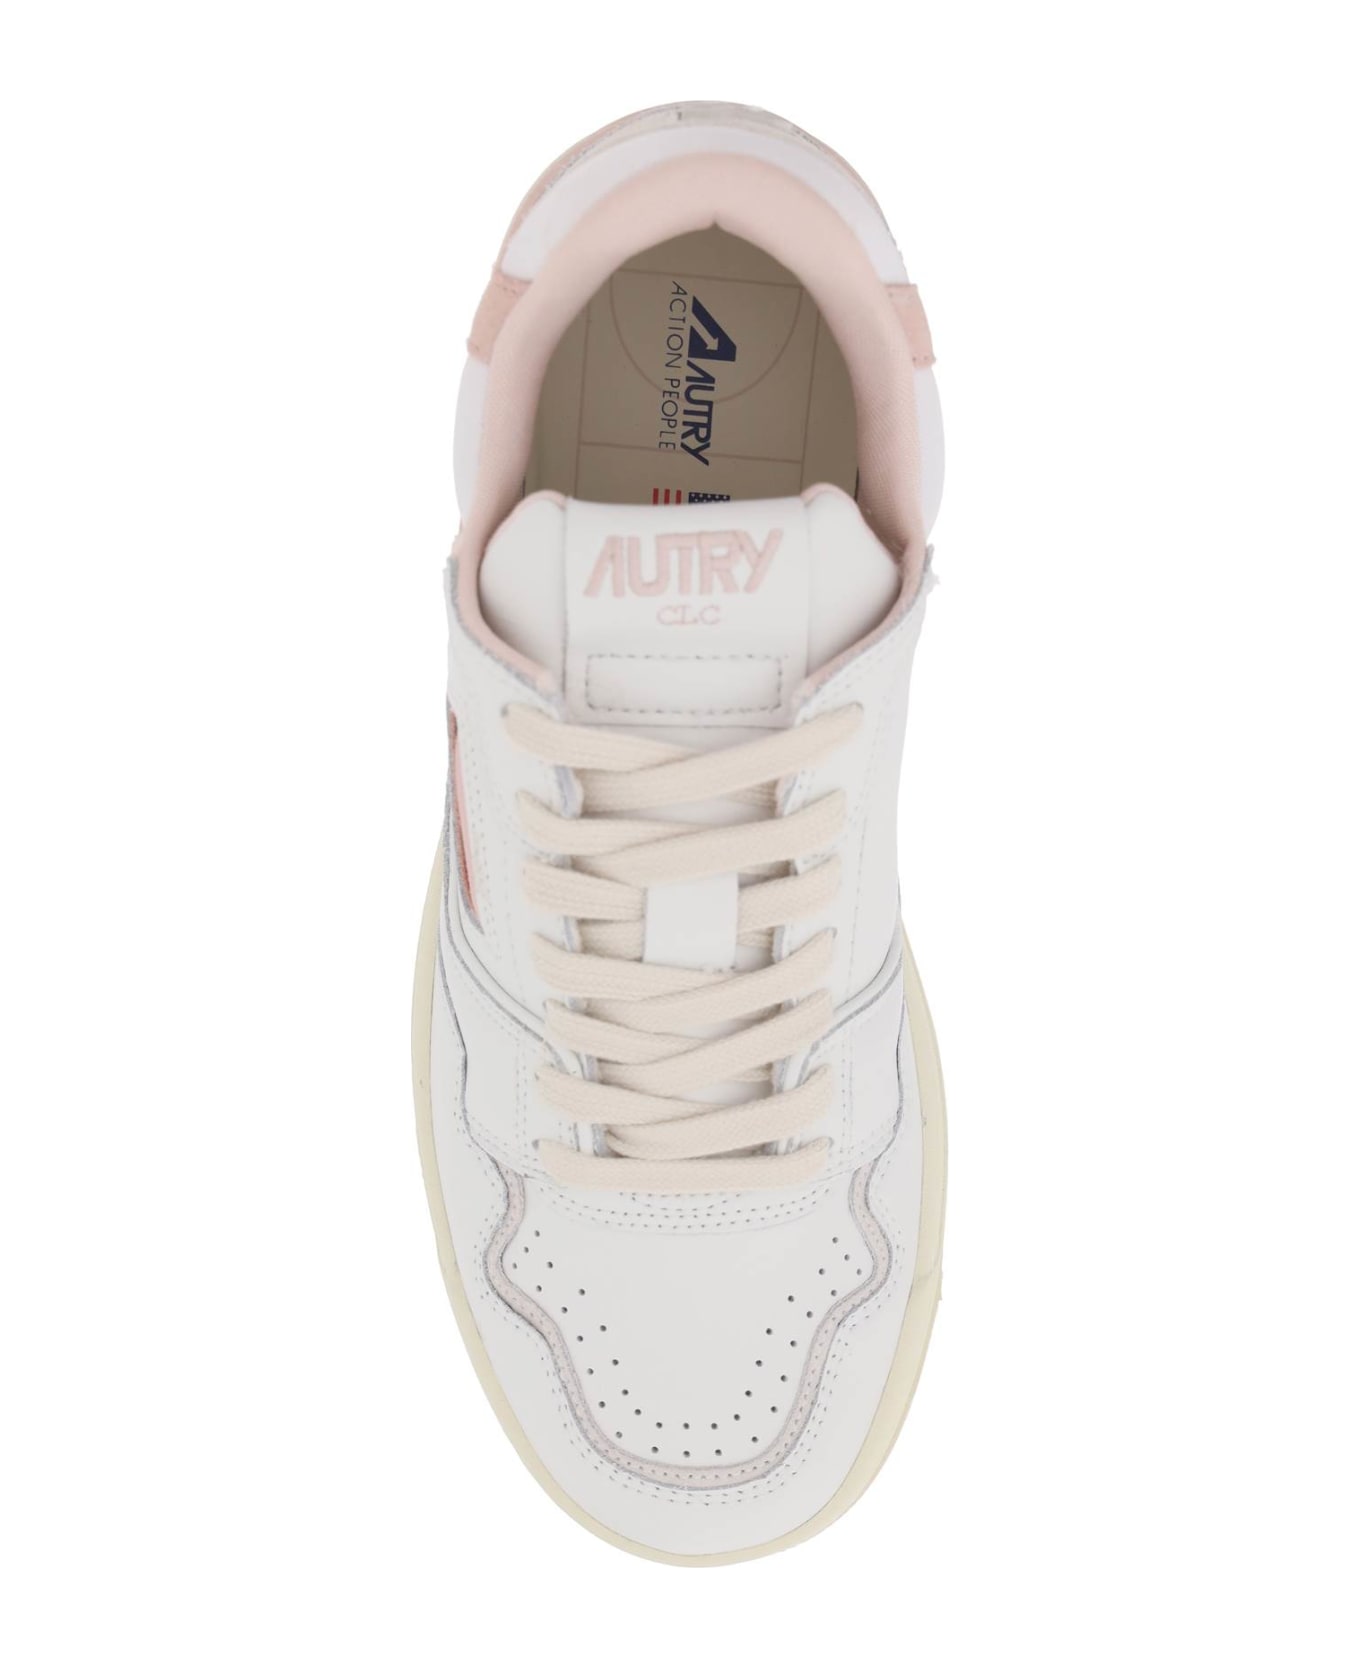 Autry Clc Sneakers In White And Pink Leather - White